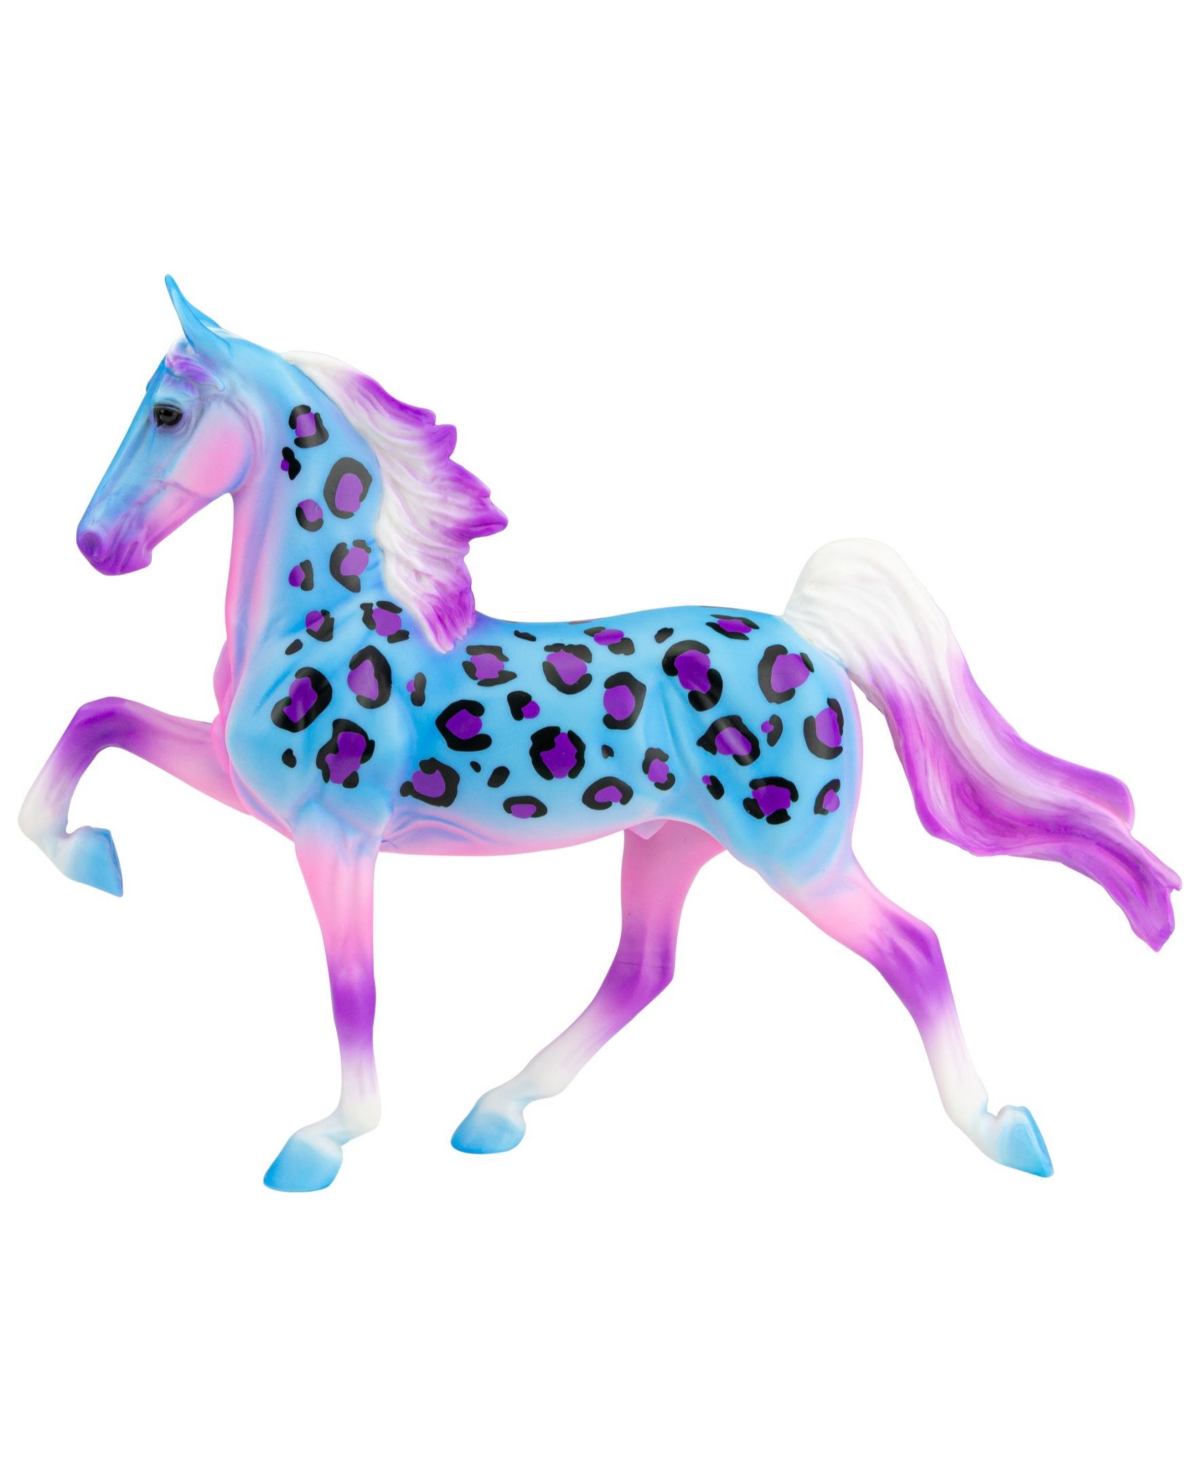 Breyer Kids' Horses Special Edition Freedom Series 1:12 Scale 90's Throwback Decorator Series Horse In Multi